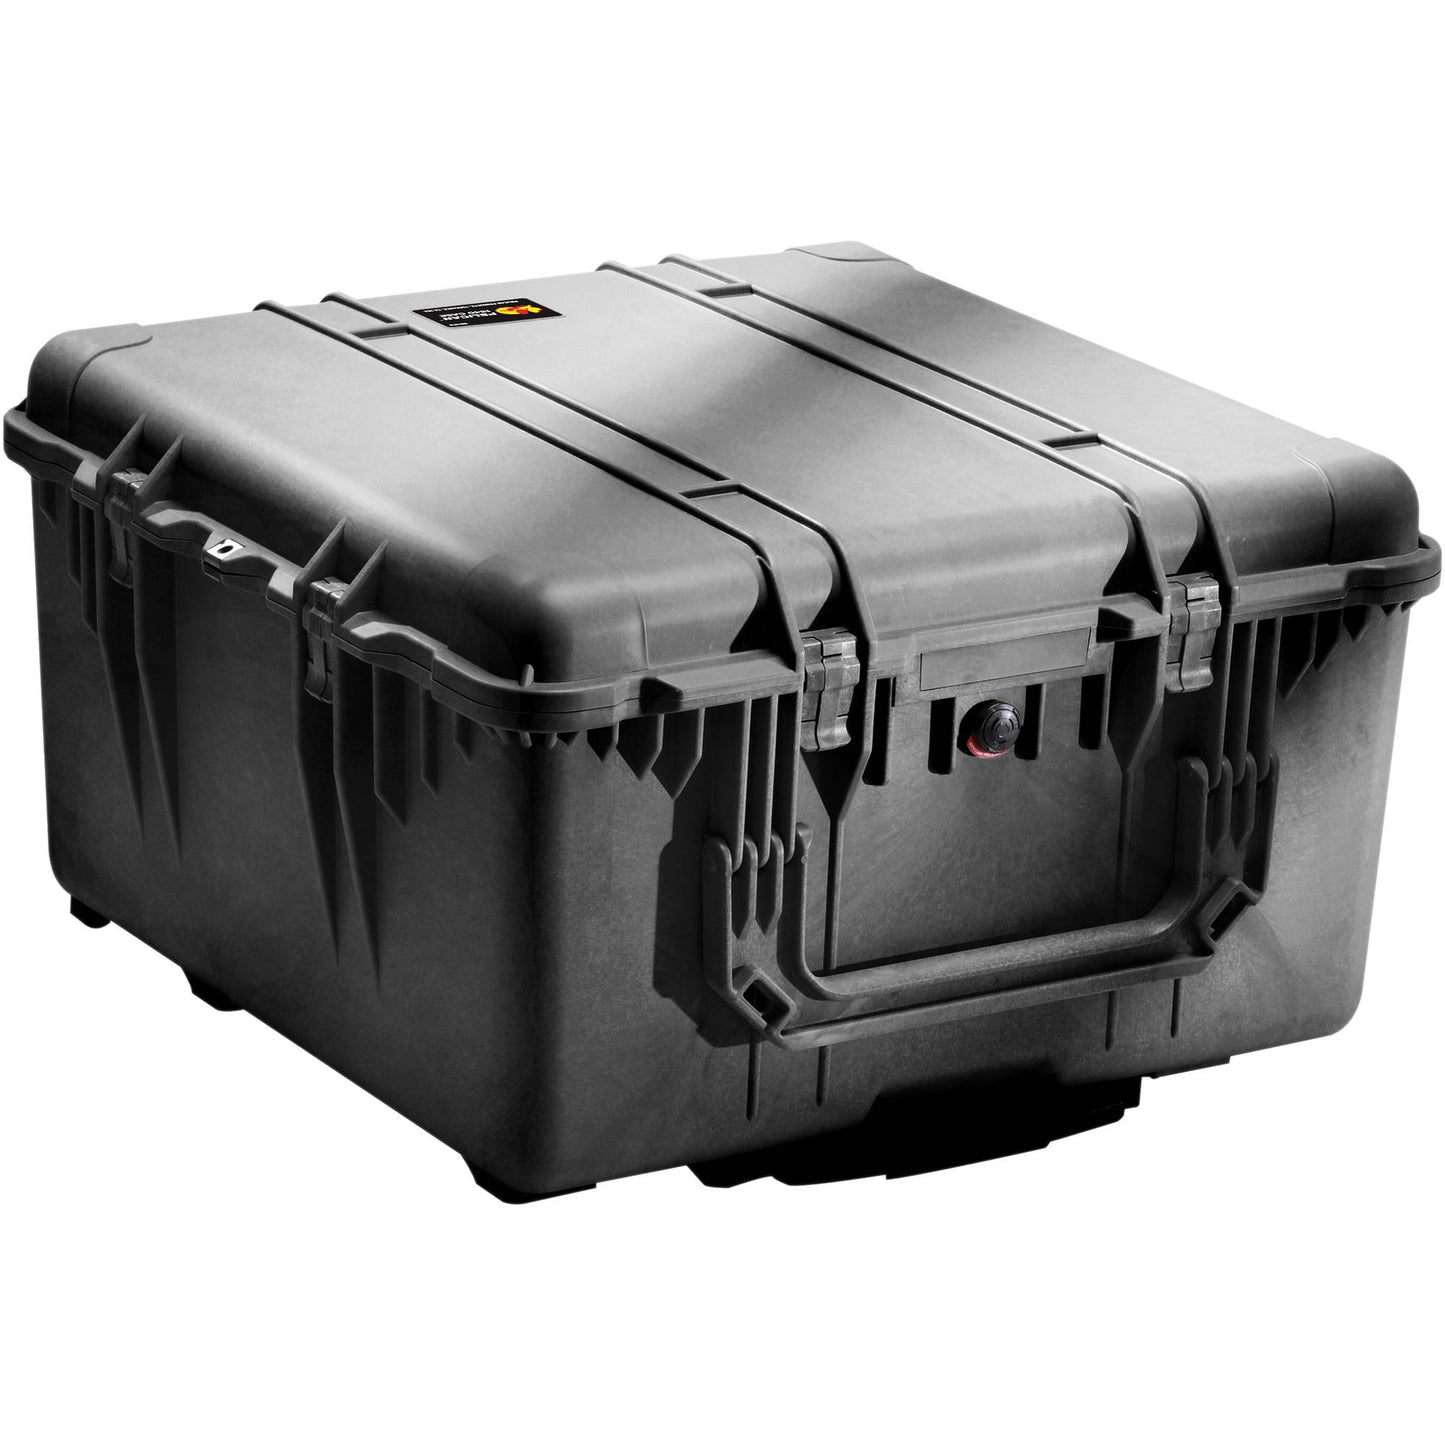 Pelican 1640 Protector Transport Case Unbreakable Watertight Dustproof Trolley Hard Casing with Extension Handle and Wheels, IP67 Rating (with Foam / Dividers)